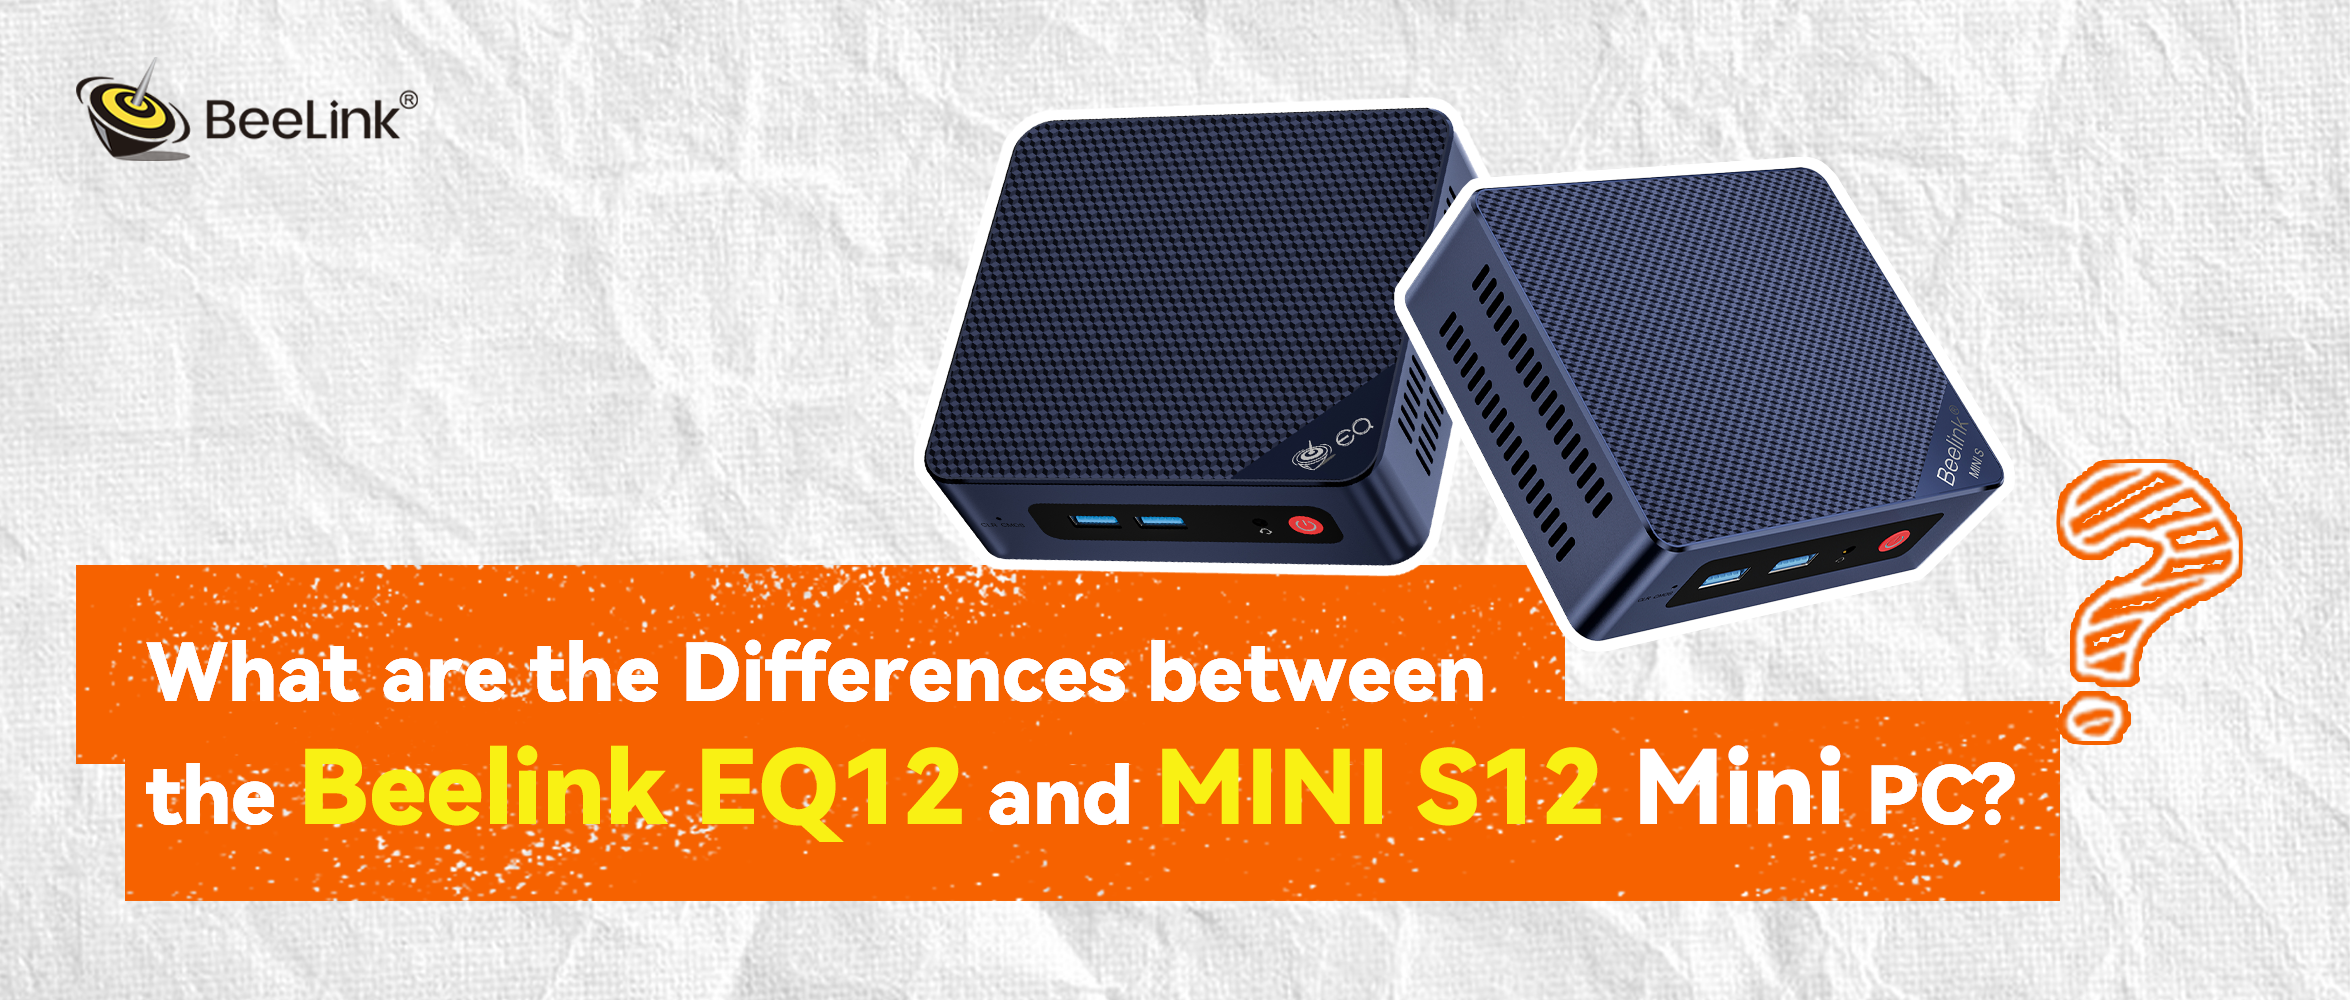 What are the Differences between the Beelink EQ12 and MINI S12 Mini PC? How to Choose?